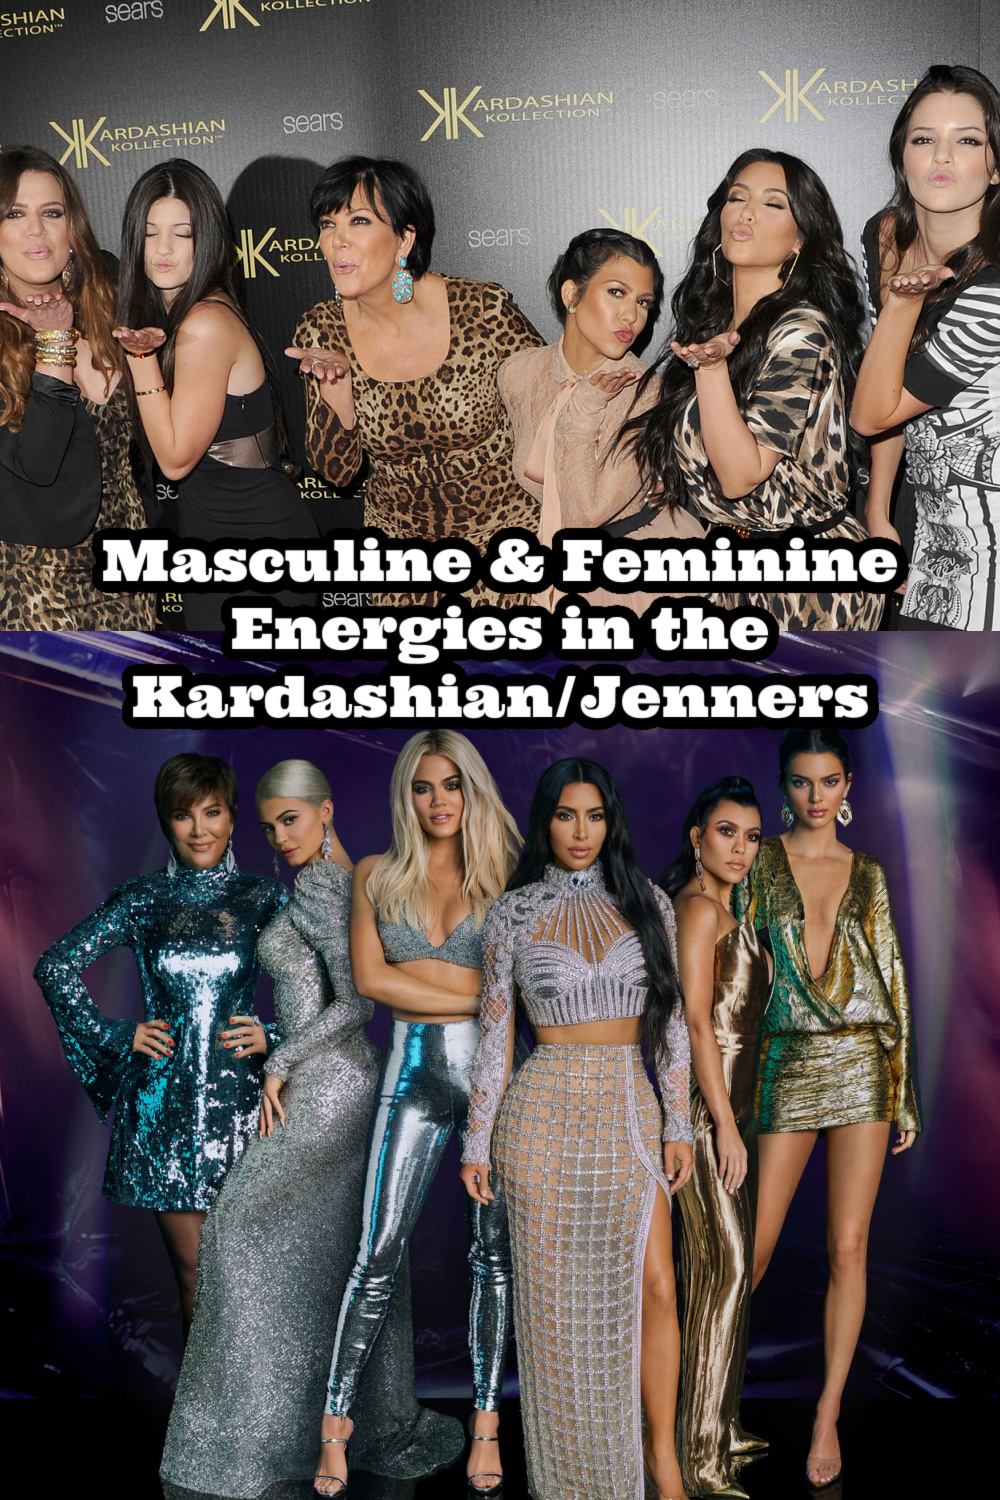 the most famous momager, why women become masculine, masculine energy mother, mother wound daughter, wounded masculine energy mother, how women become masculine, psychology breakdowns of kardashians, why we hate on kris jenner, kourtney kardashian analysis, kim kardashian analysis, kim kardashian personality analysis, khloe kardashian personality analysis, rob kardashian personality analysis, kendall jenner analysis, kylie jenner analysis, masculine and feminine energies, kardashian femininity, masculine and feminine energy, masculine and feminine energy in relationships, understanding masculine and feminine energy, Everyday starlet, sarah blodgett,